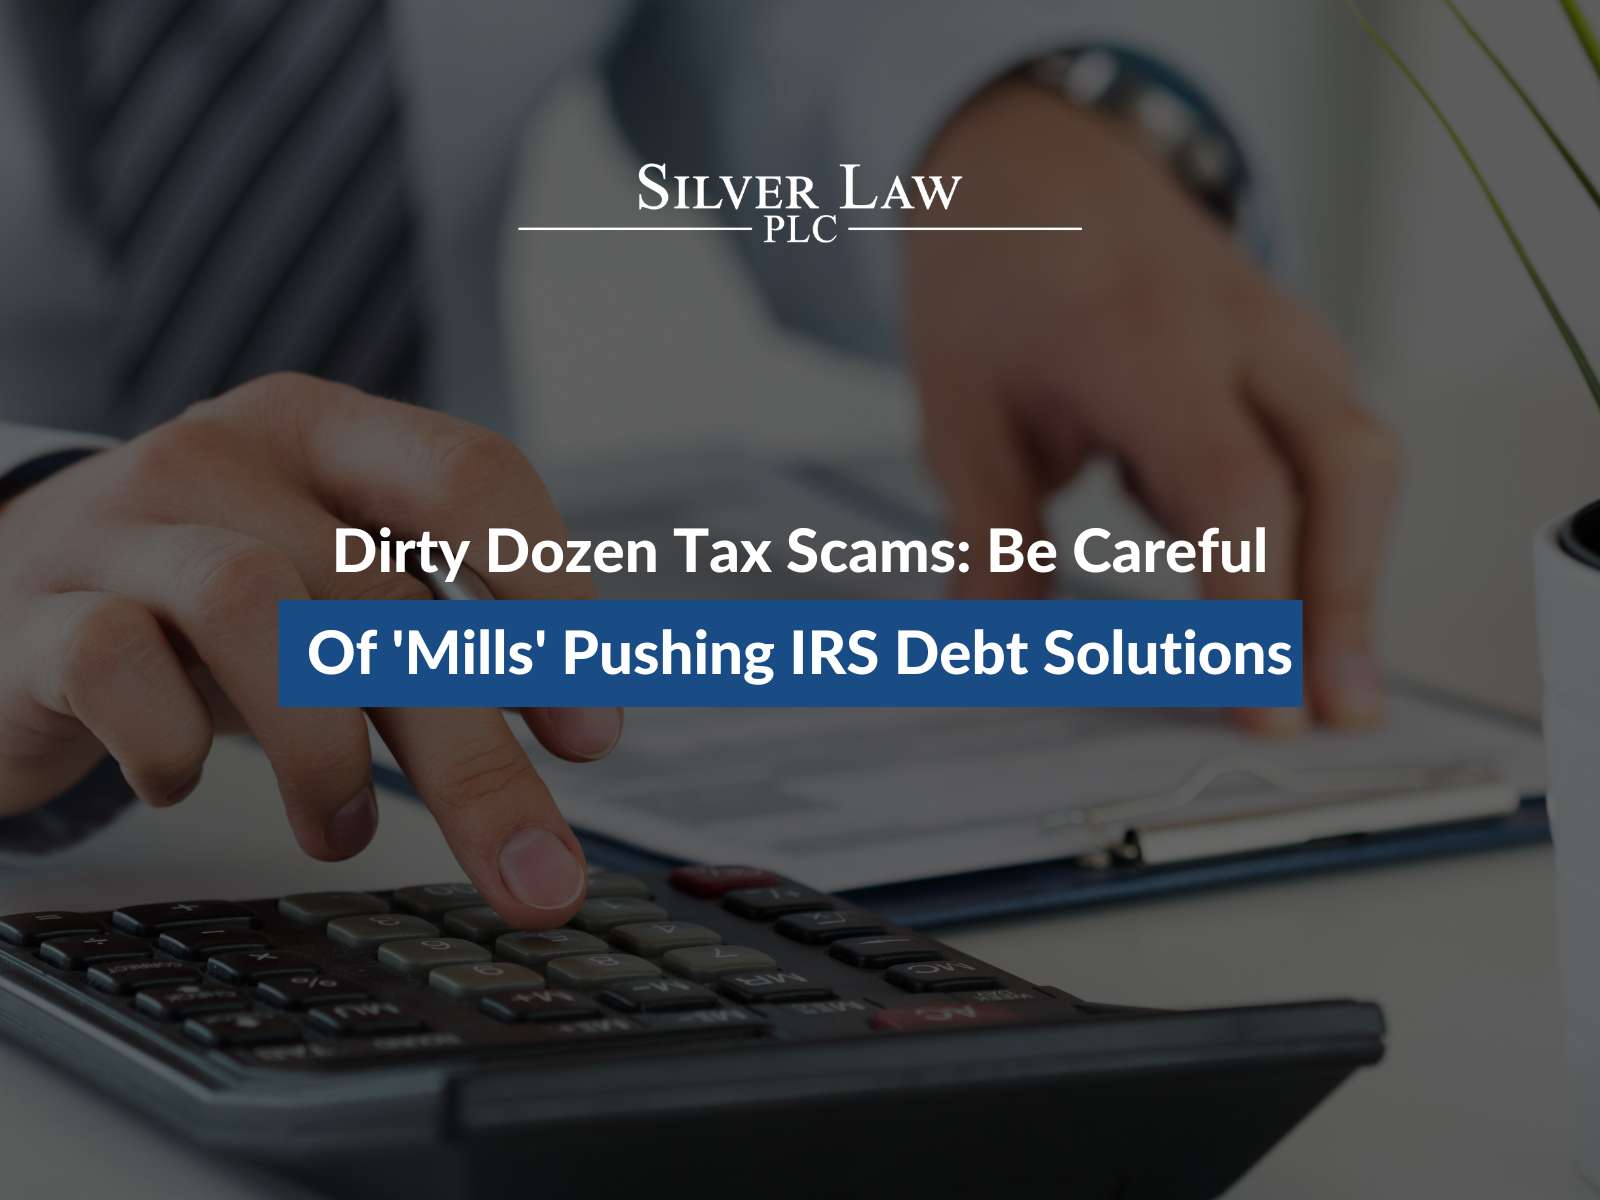 Dirty Dozen Tax Scams: Be Careful Of ‘Mills’ Pushing IRS Debt Solutions